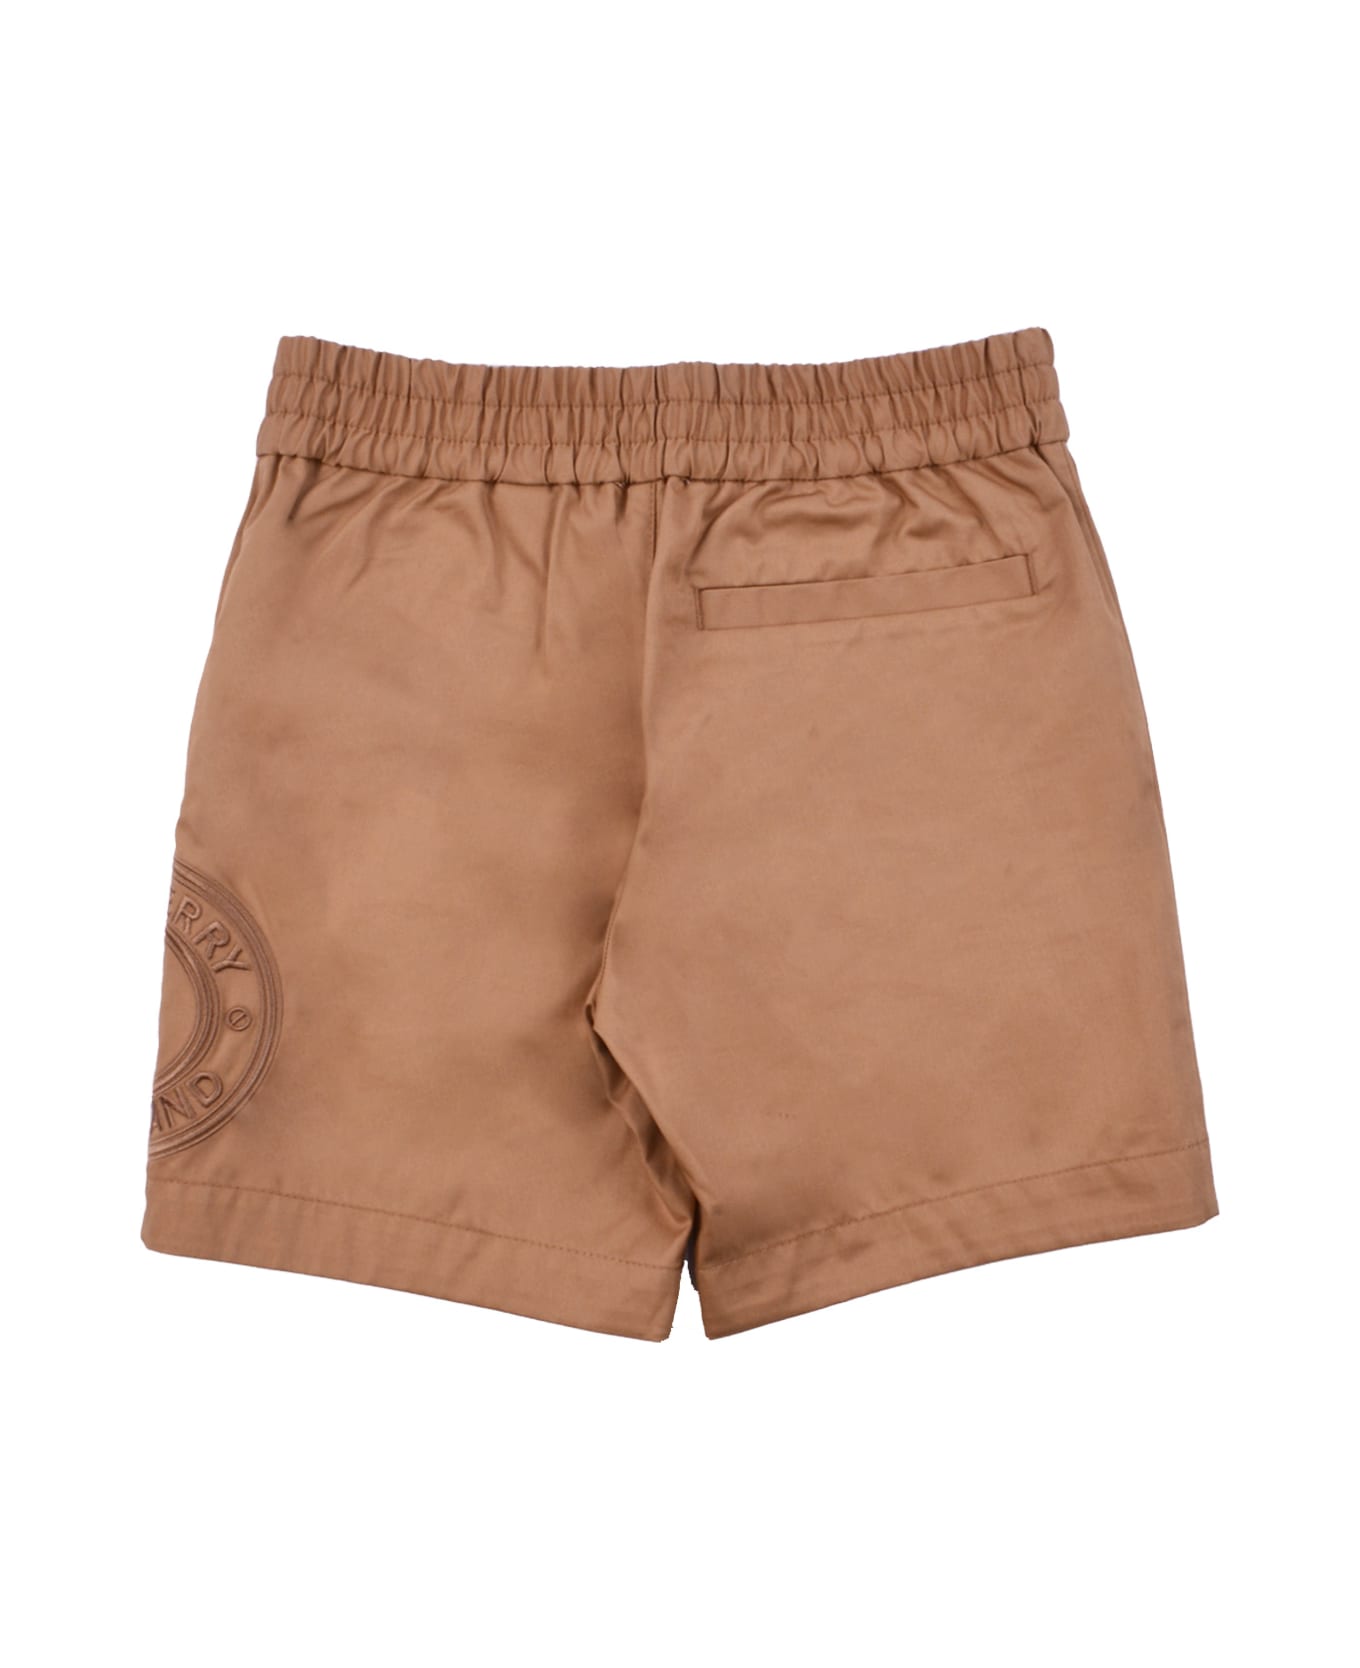 Burberry Shorts With Graphics And Sweatshirt - Beige